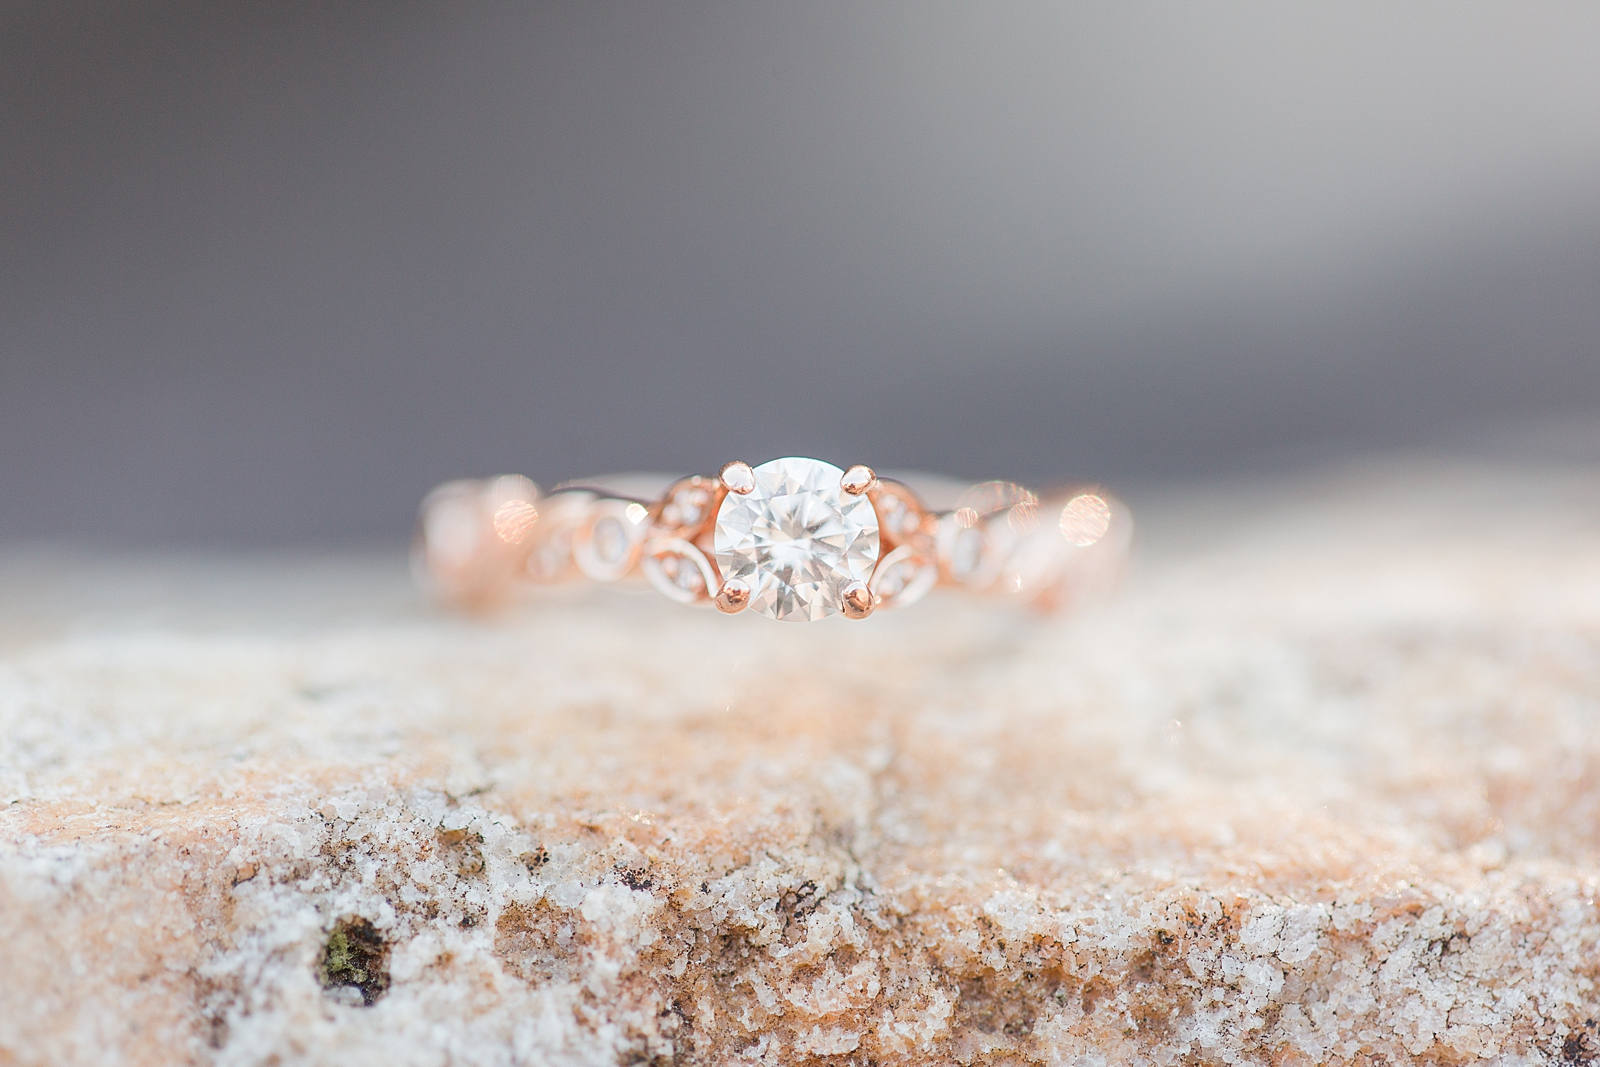 Ocoee River Engagement Session Ring on rock detail Photo